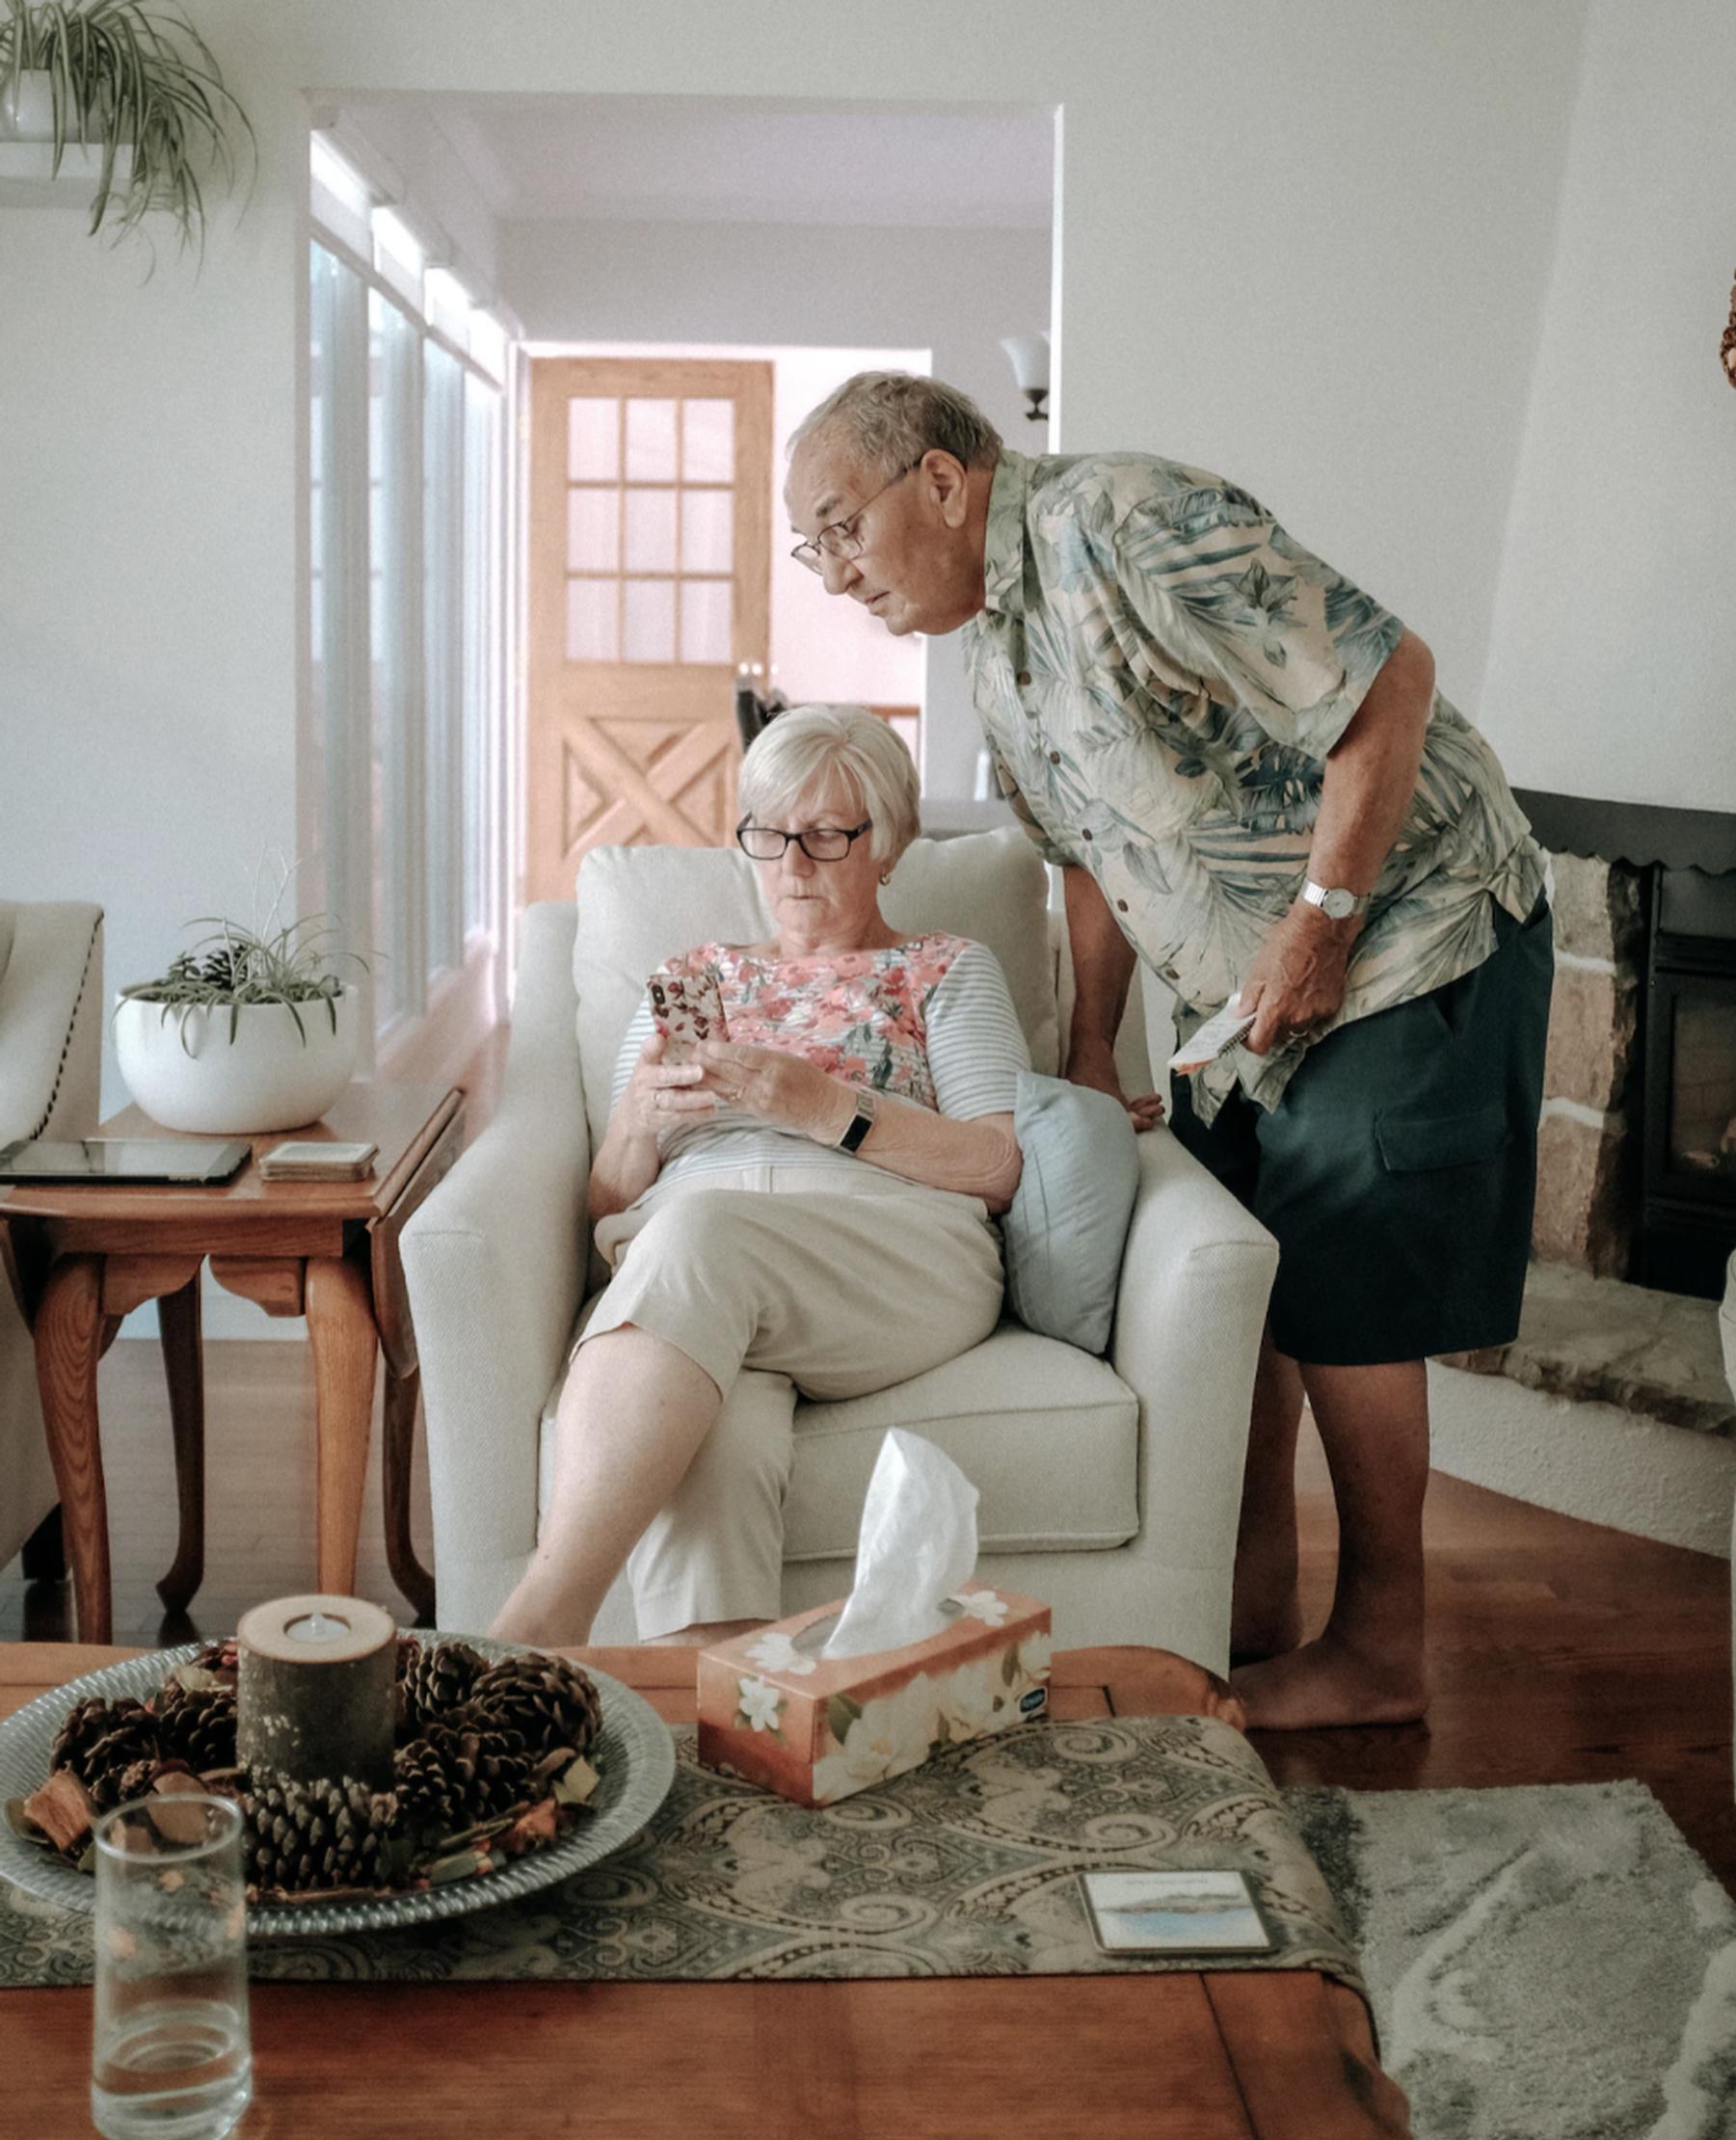 Despite their common portrayal as Luddites, a fifth of people of pensionable age have had a smartphone for over 10 years (Keith Tanner/Unsplash)